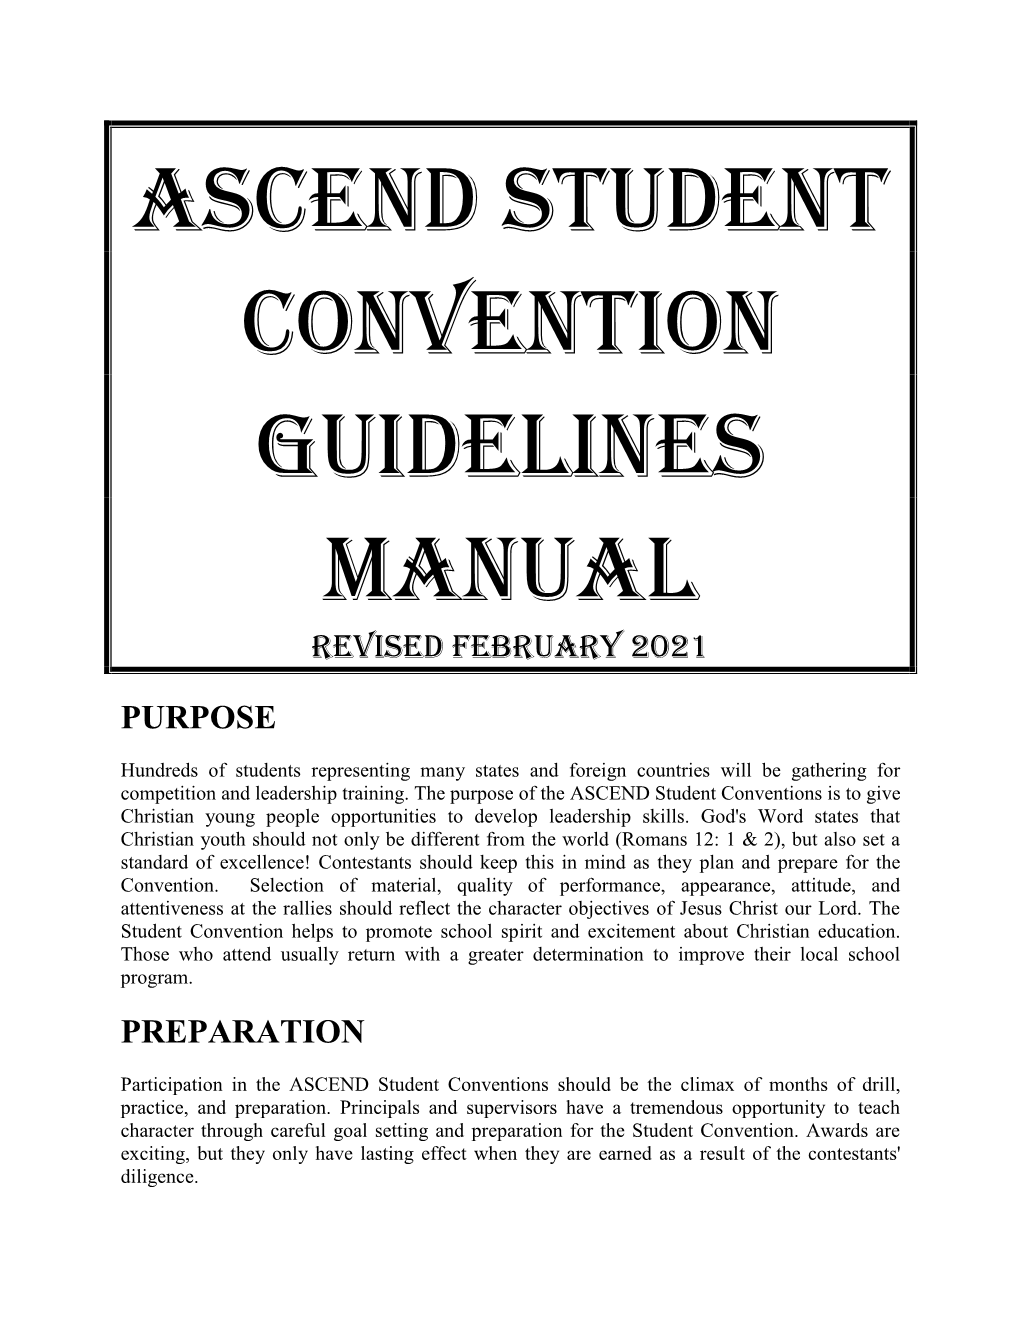 Ascend Student Convention Guidelines Manual Revised February 2021